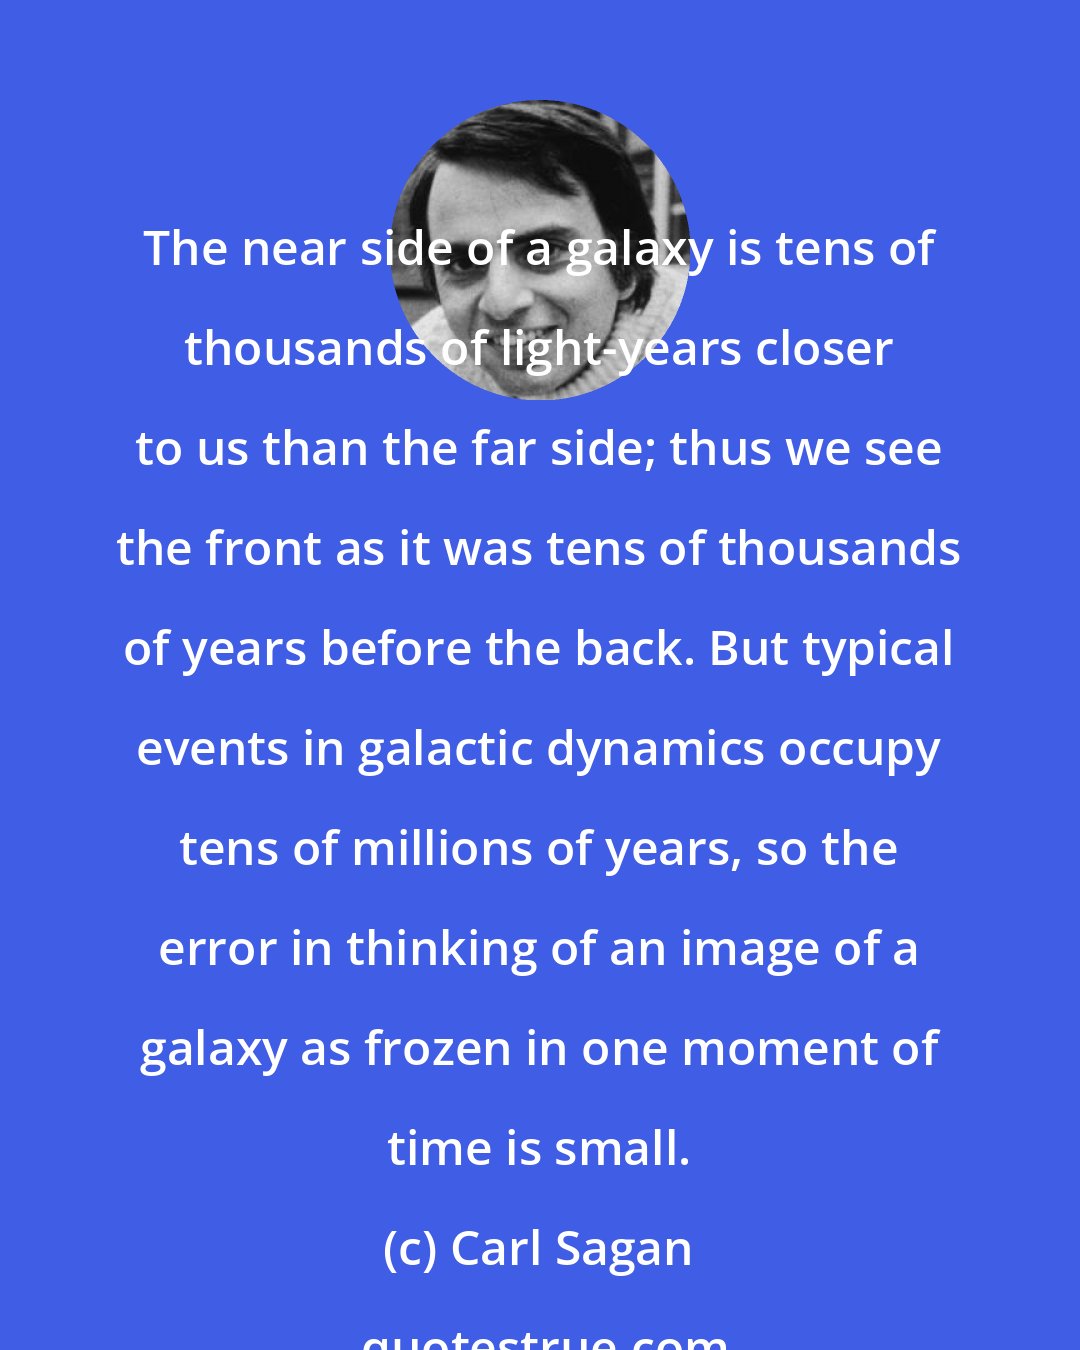 Carl Sagan: The near side of a galaxy is tens of thousands of light-years closer to us than the far side; thus we see the front as it was tens of thousands of years before the back. But typical events in galactic dynamics occupy tens of millions of years, so the error in thinking of an image of a galaxy as frozen in one moment of time is small.